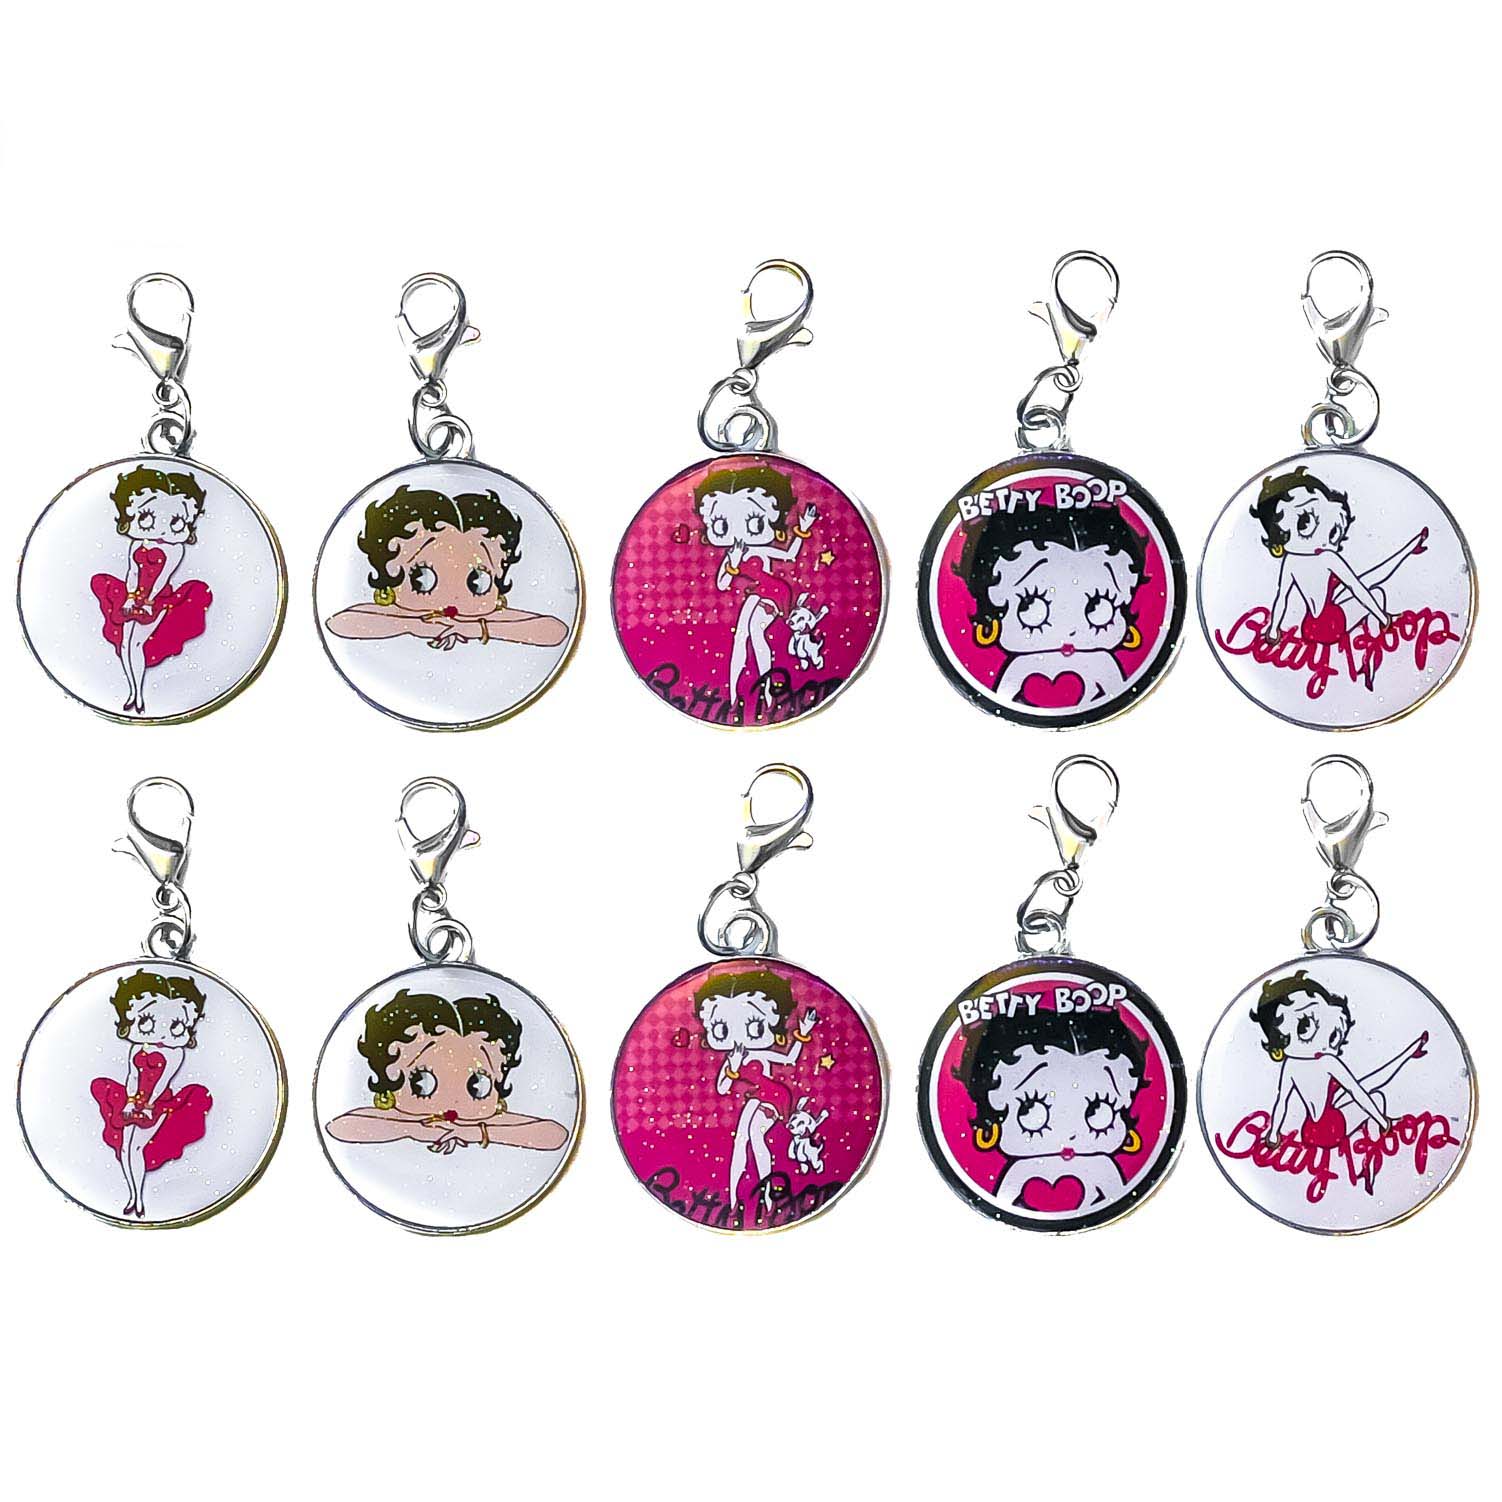 Betty Boop Cabochon Drip Clips Metal Keychain 10 Pack Variety